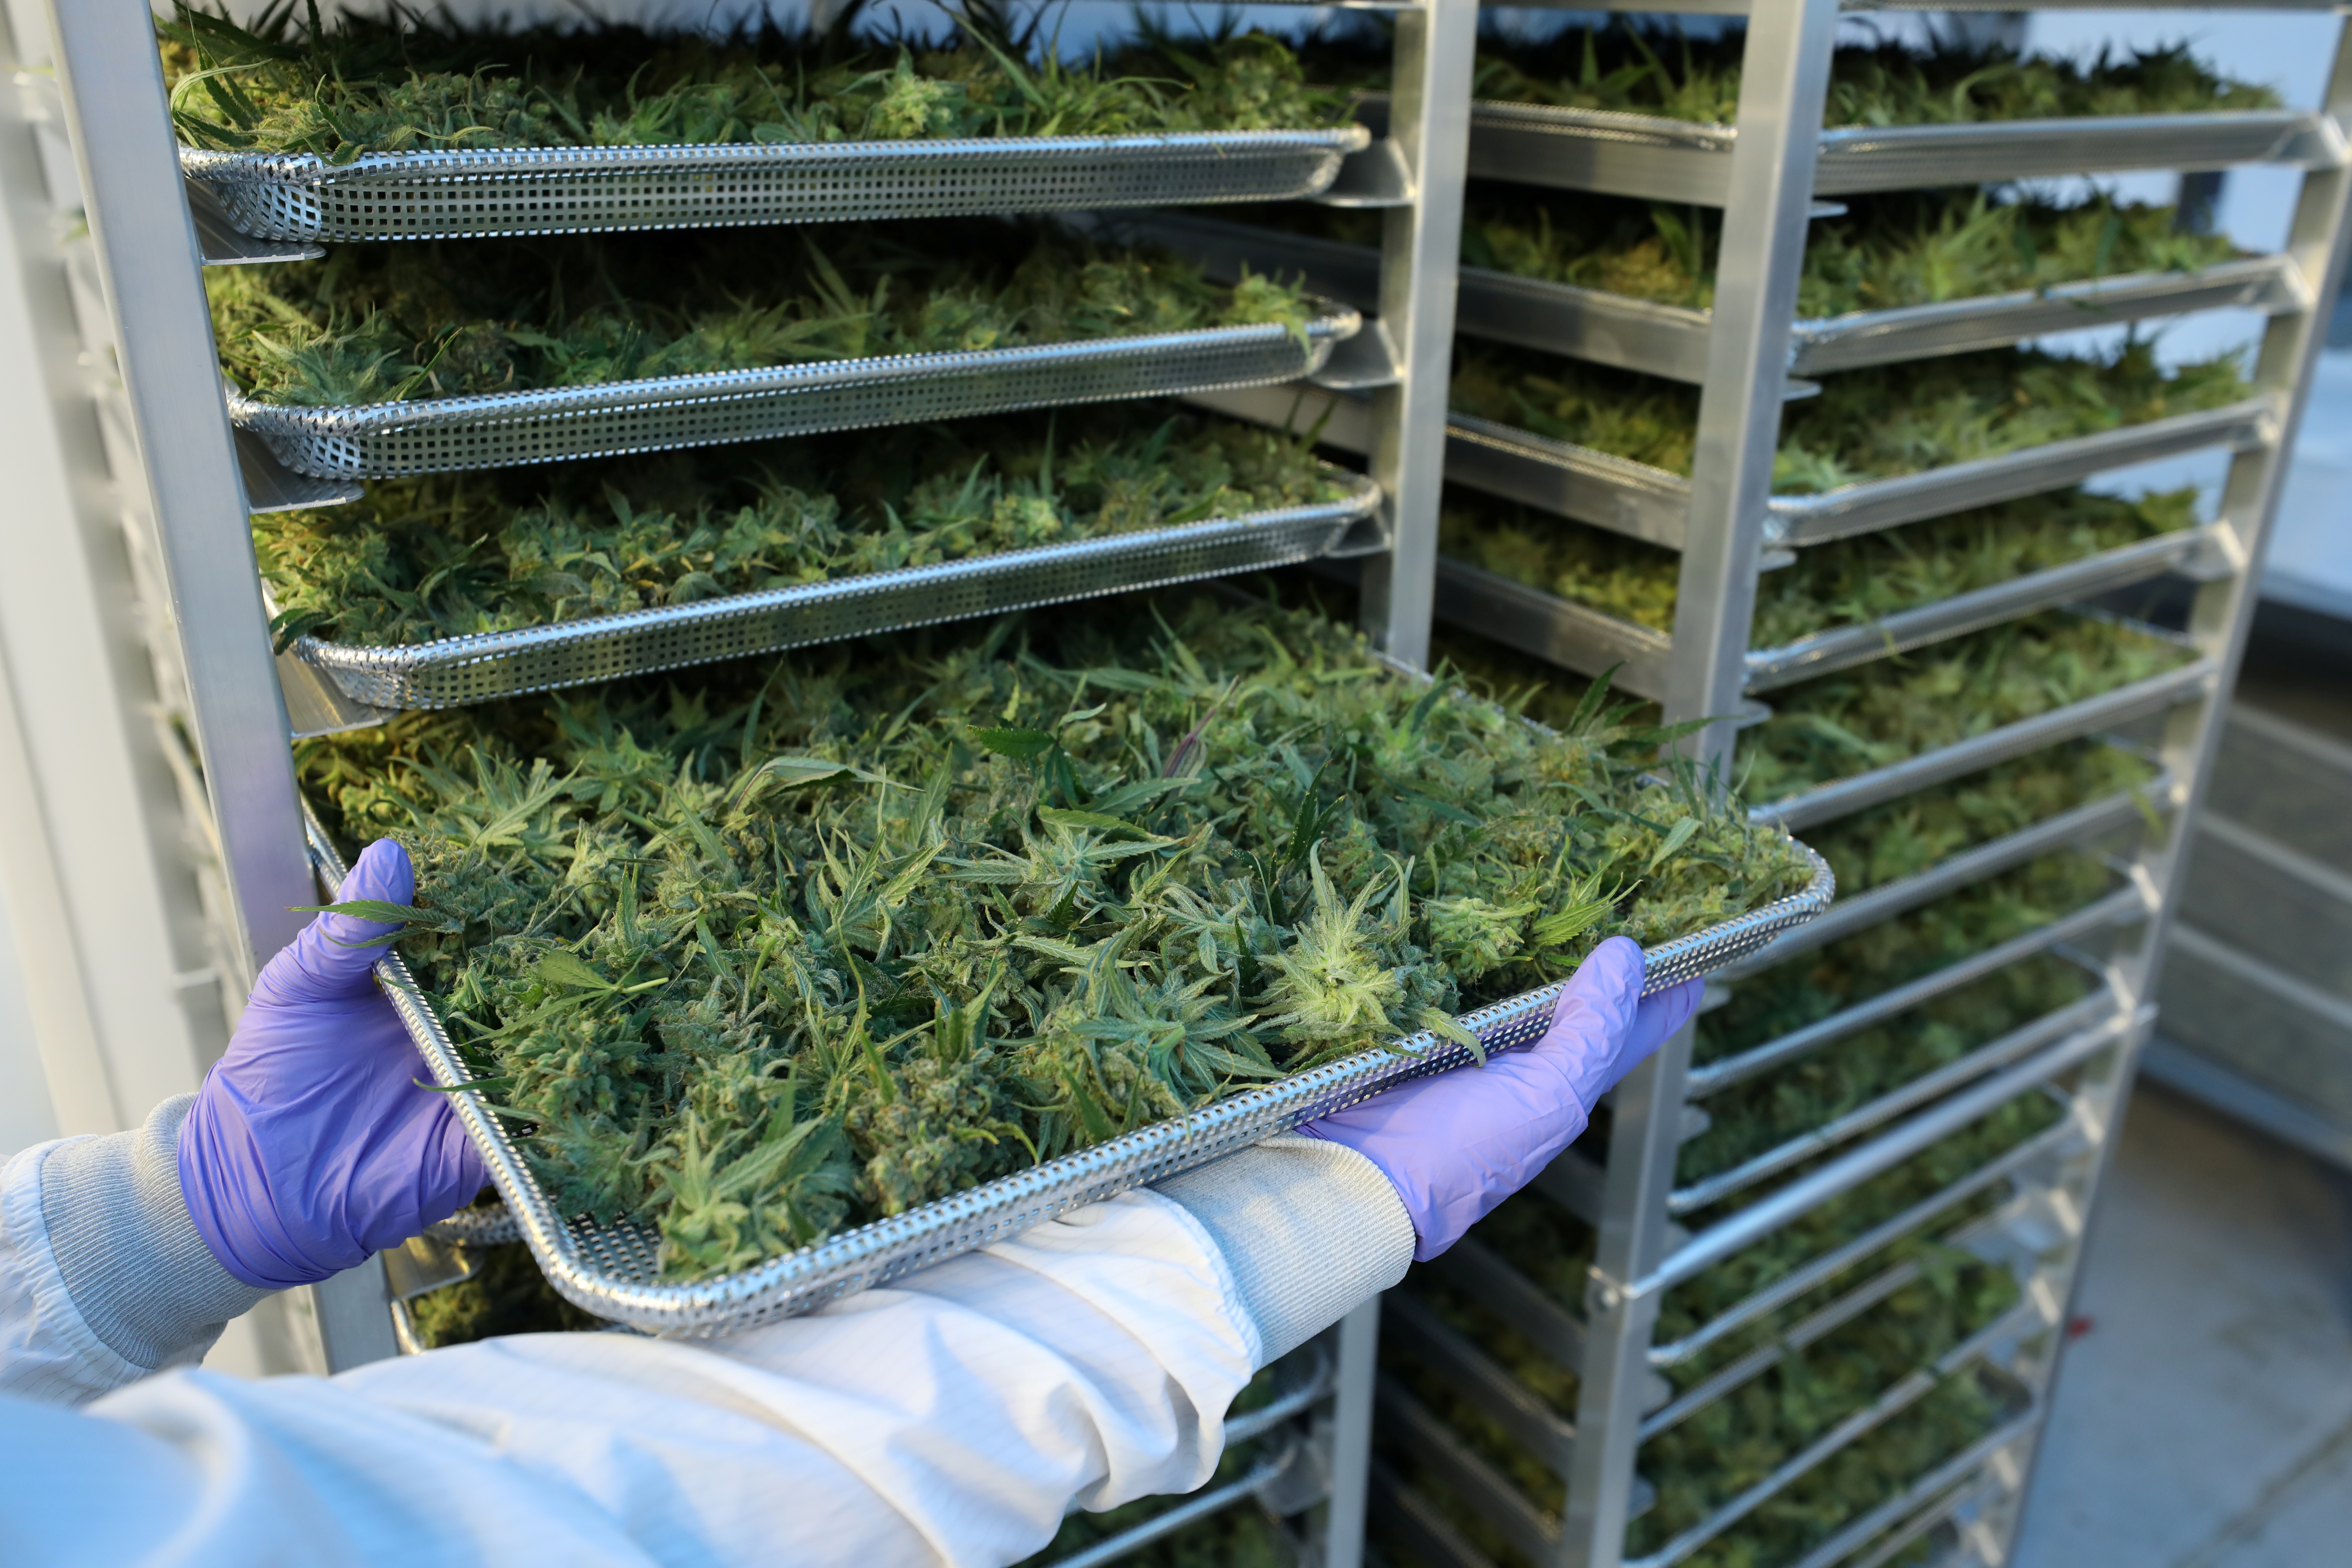 FILE PHOTO - An employee displays cannabis buds at Hexo Corp's facilities in Gatineau